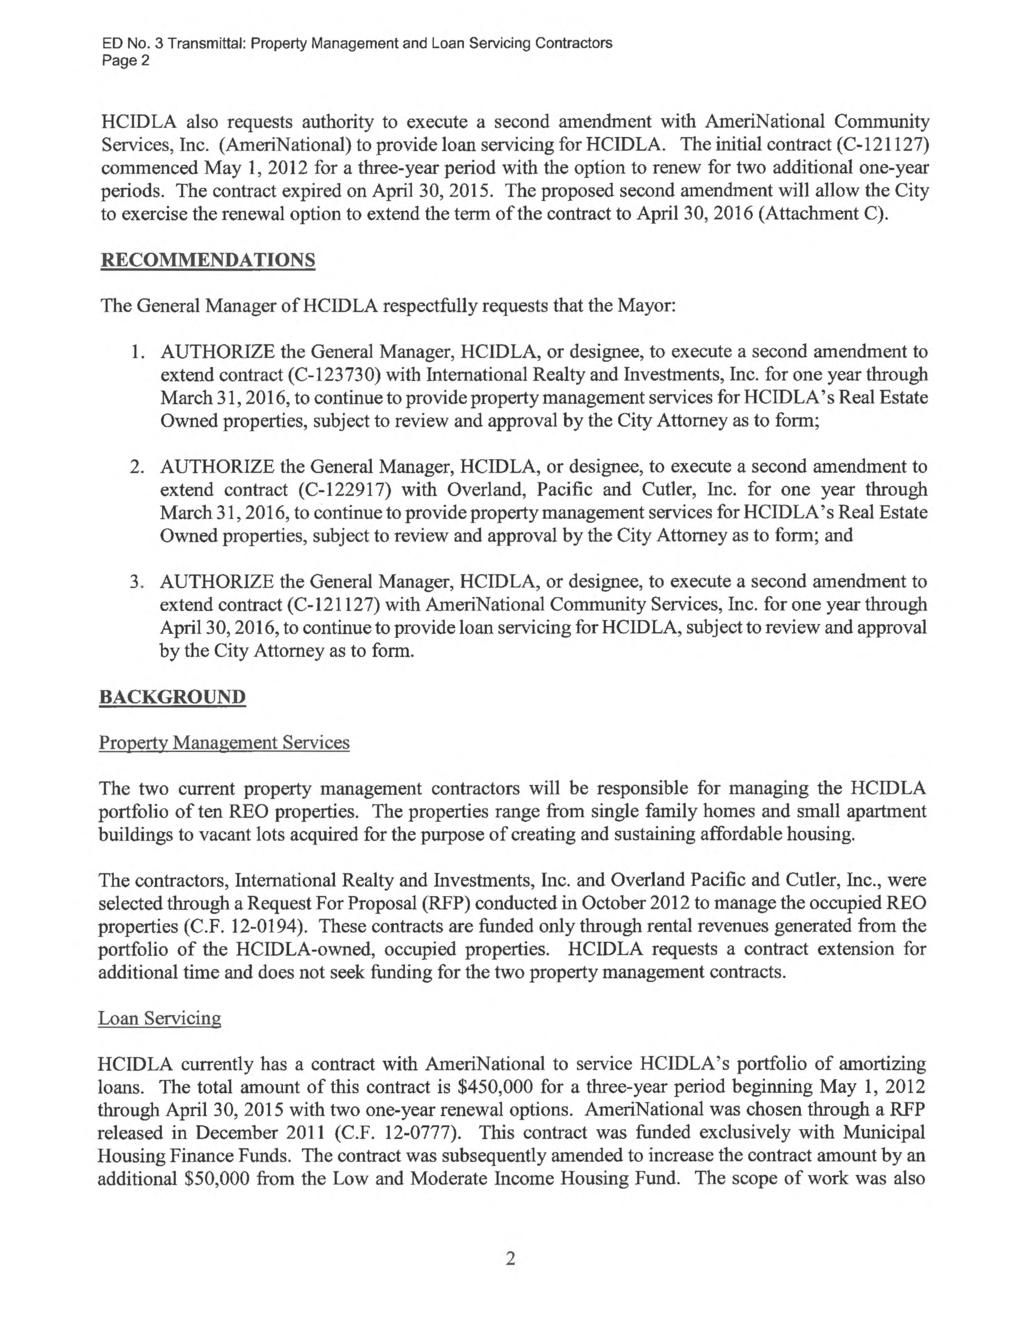 ED No. 3 Transmittal: Property Management and Loan Servicing Contractors Page 2 HCIDLA also requests authority to execute a second amendment with AmeriNational Community Services, Inc.